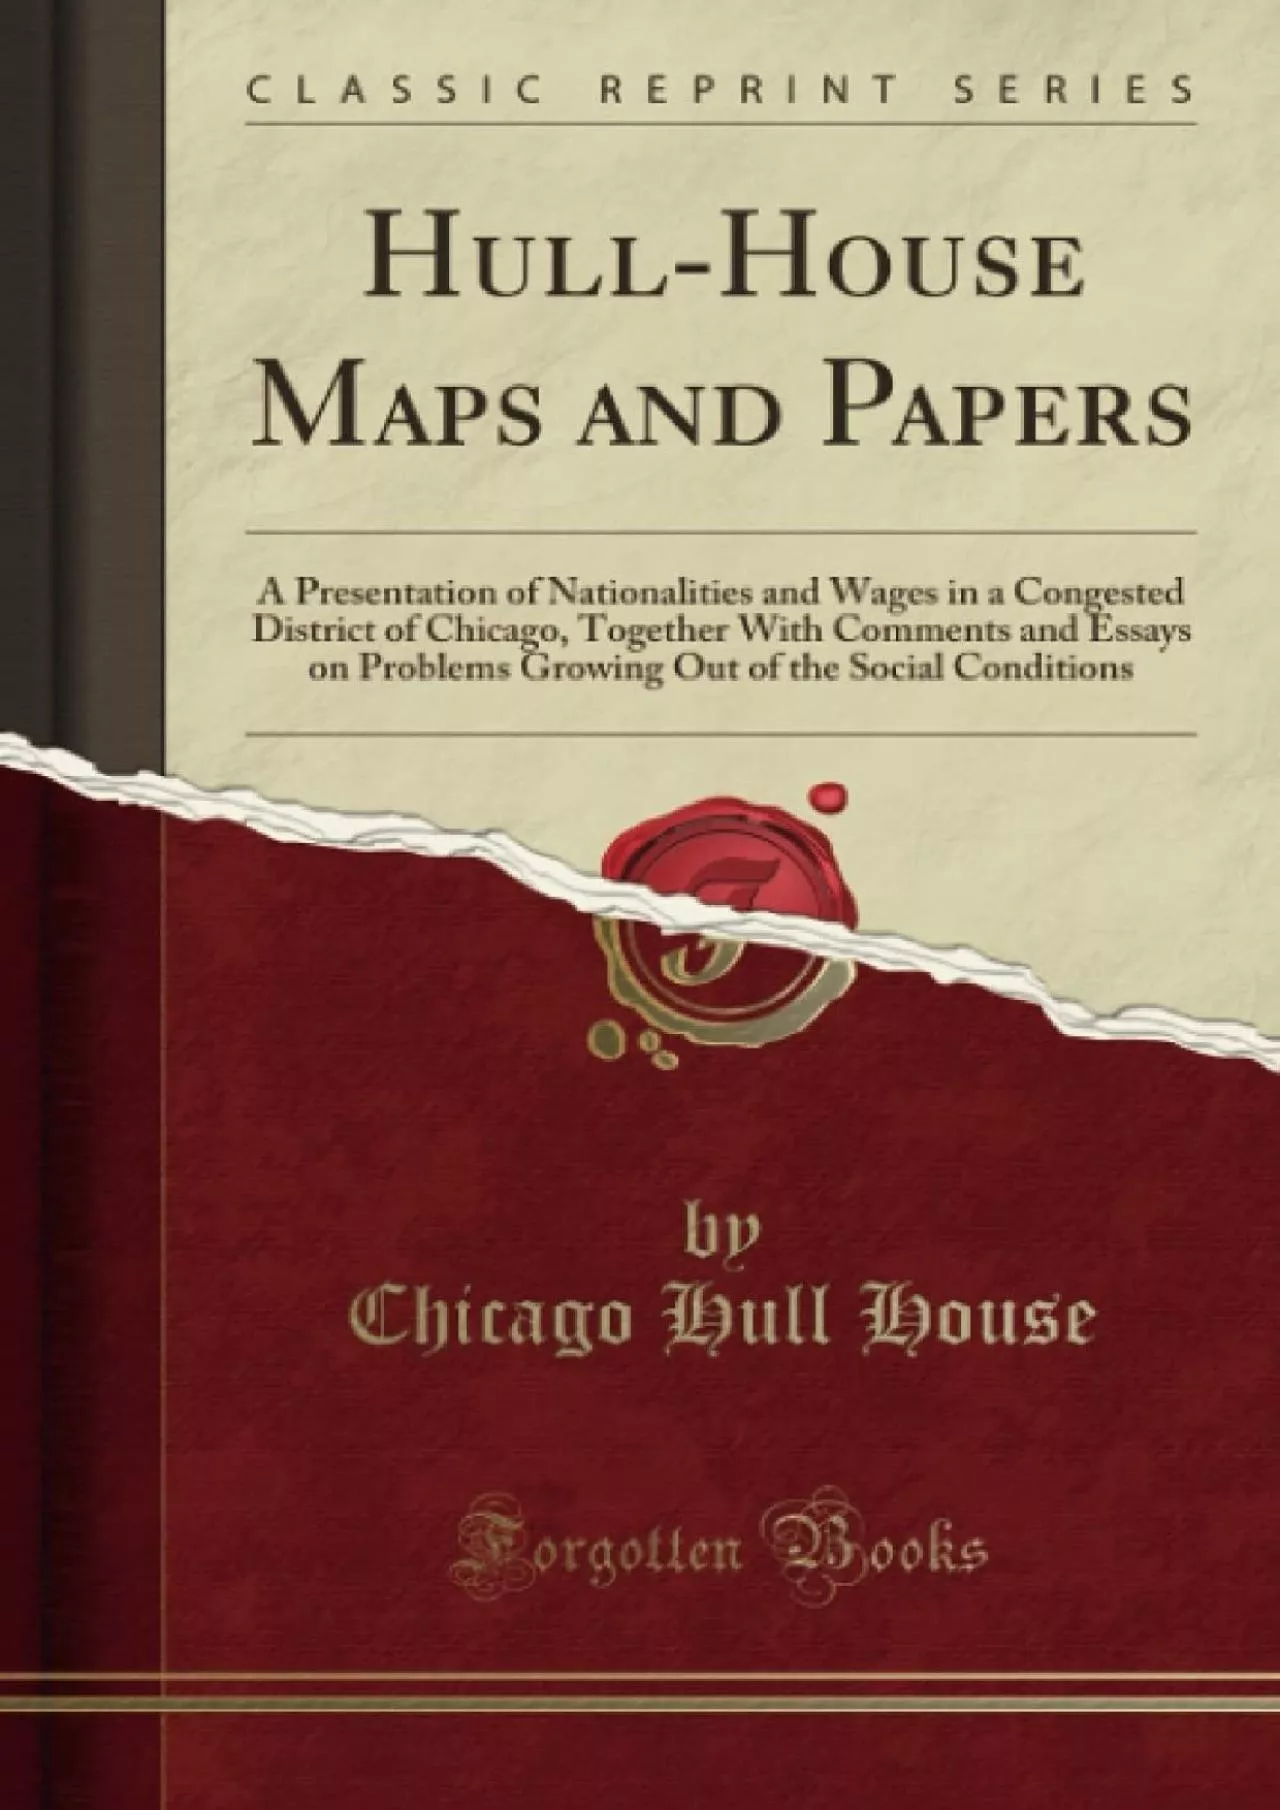 (DOWNLOAD)-Hull-House Maps and Papers: A Presentation of Nationalities and Wages in a